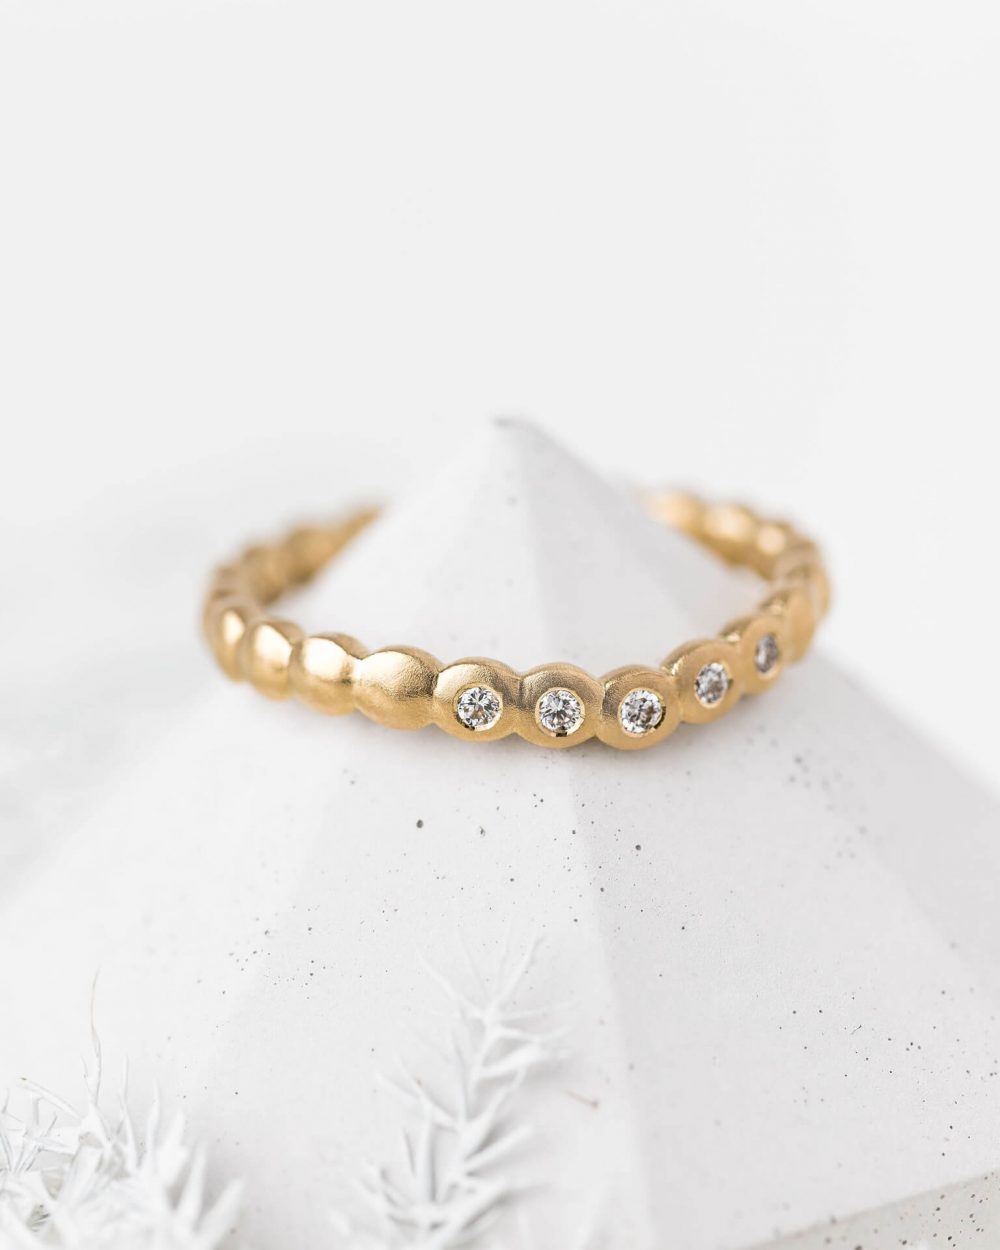 Mini Cups Curved Diamond Ring Handmade In Yellow Gold And Set With Five Sparkle Diamonds. Pictured On A Cone. Handmade By Bristol Jeweller Jacks Turner.